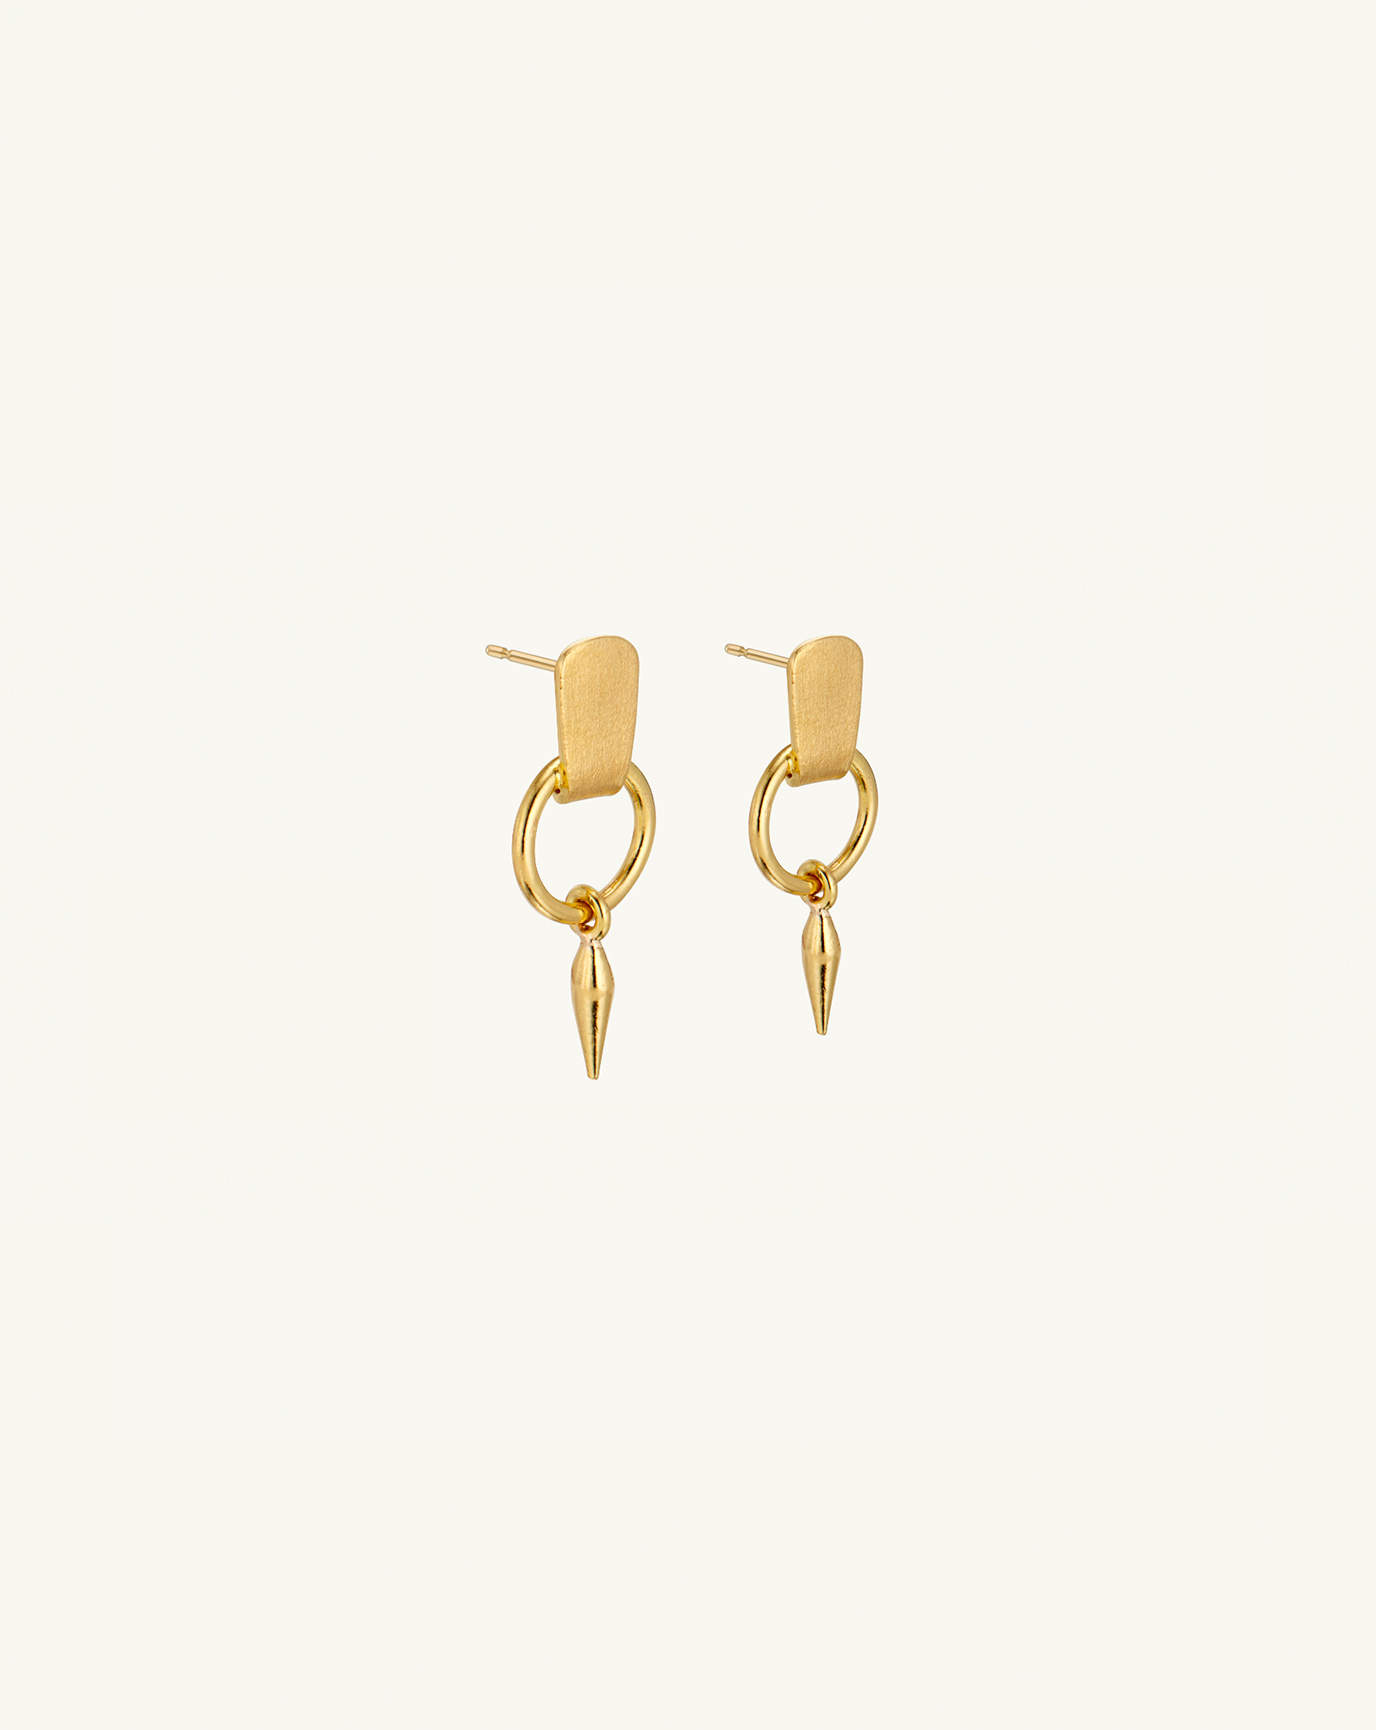 Side view product image of the Geometric Pod Drop earrings